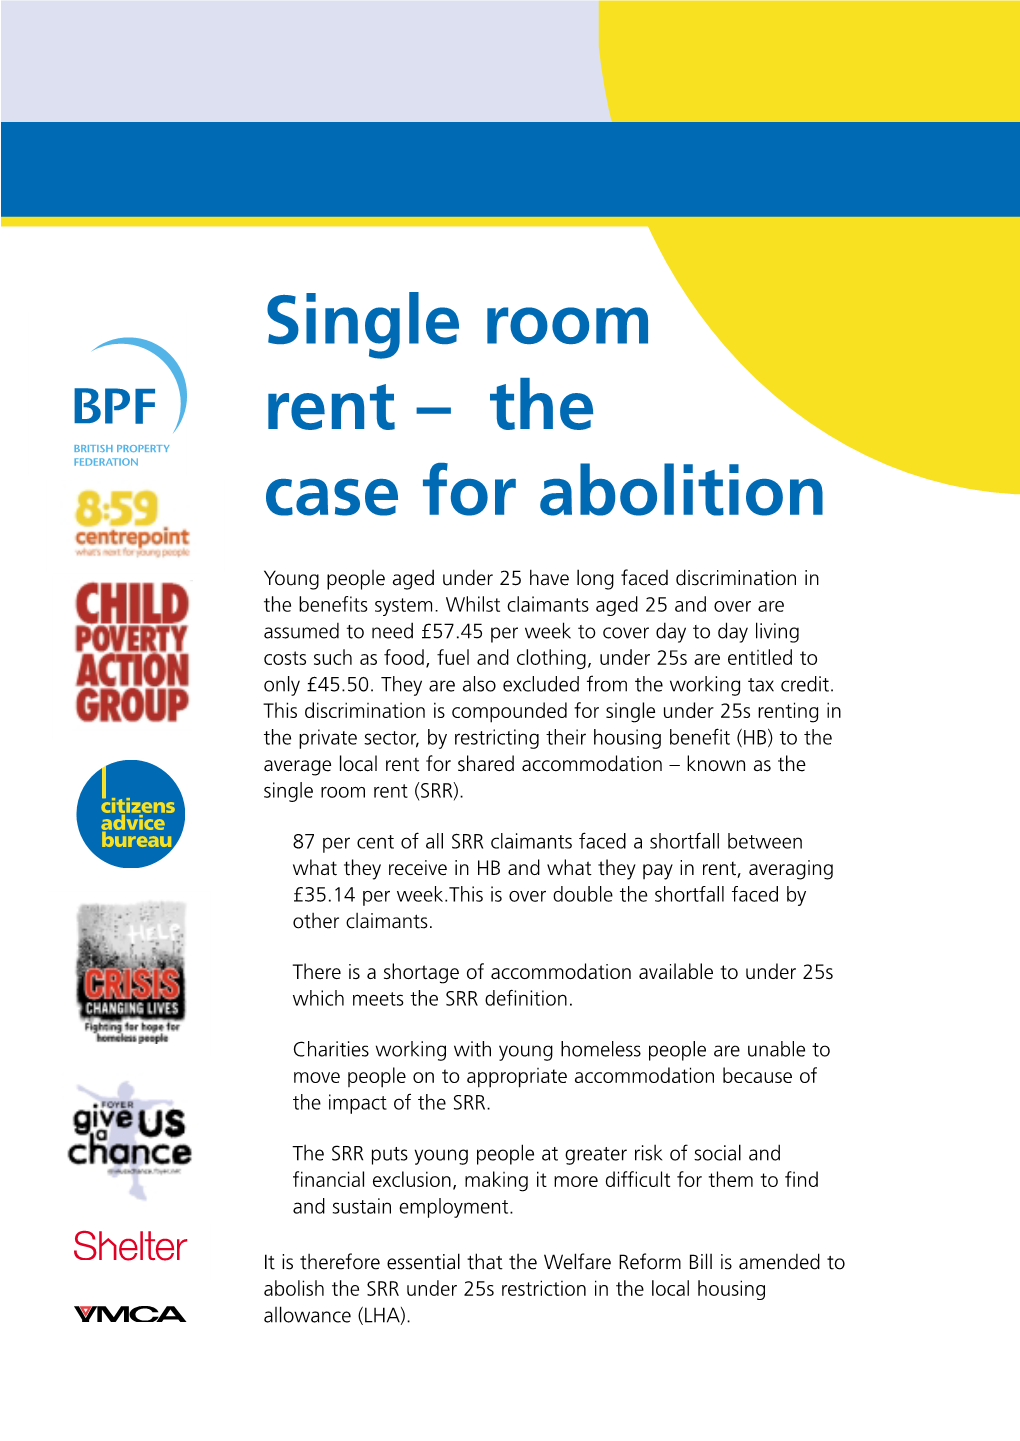 Single Room Rent – the Case for Abolition